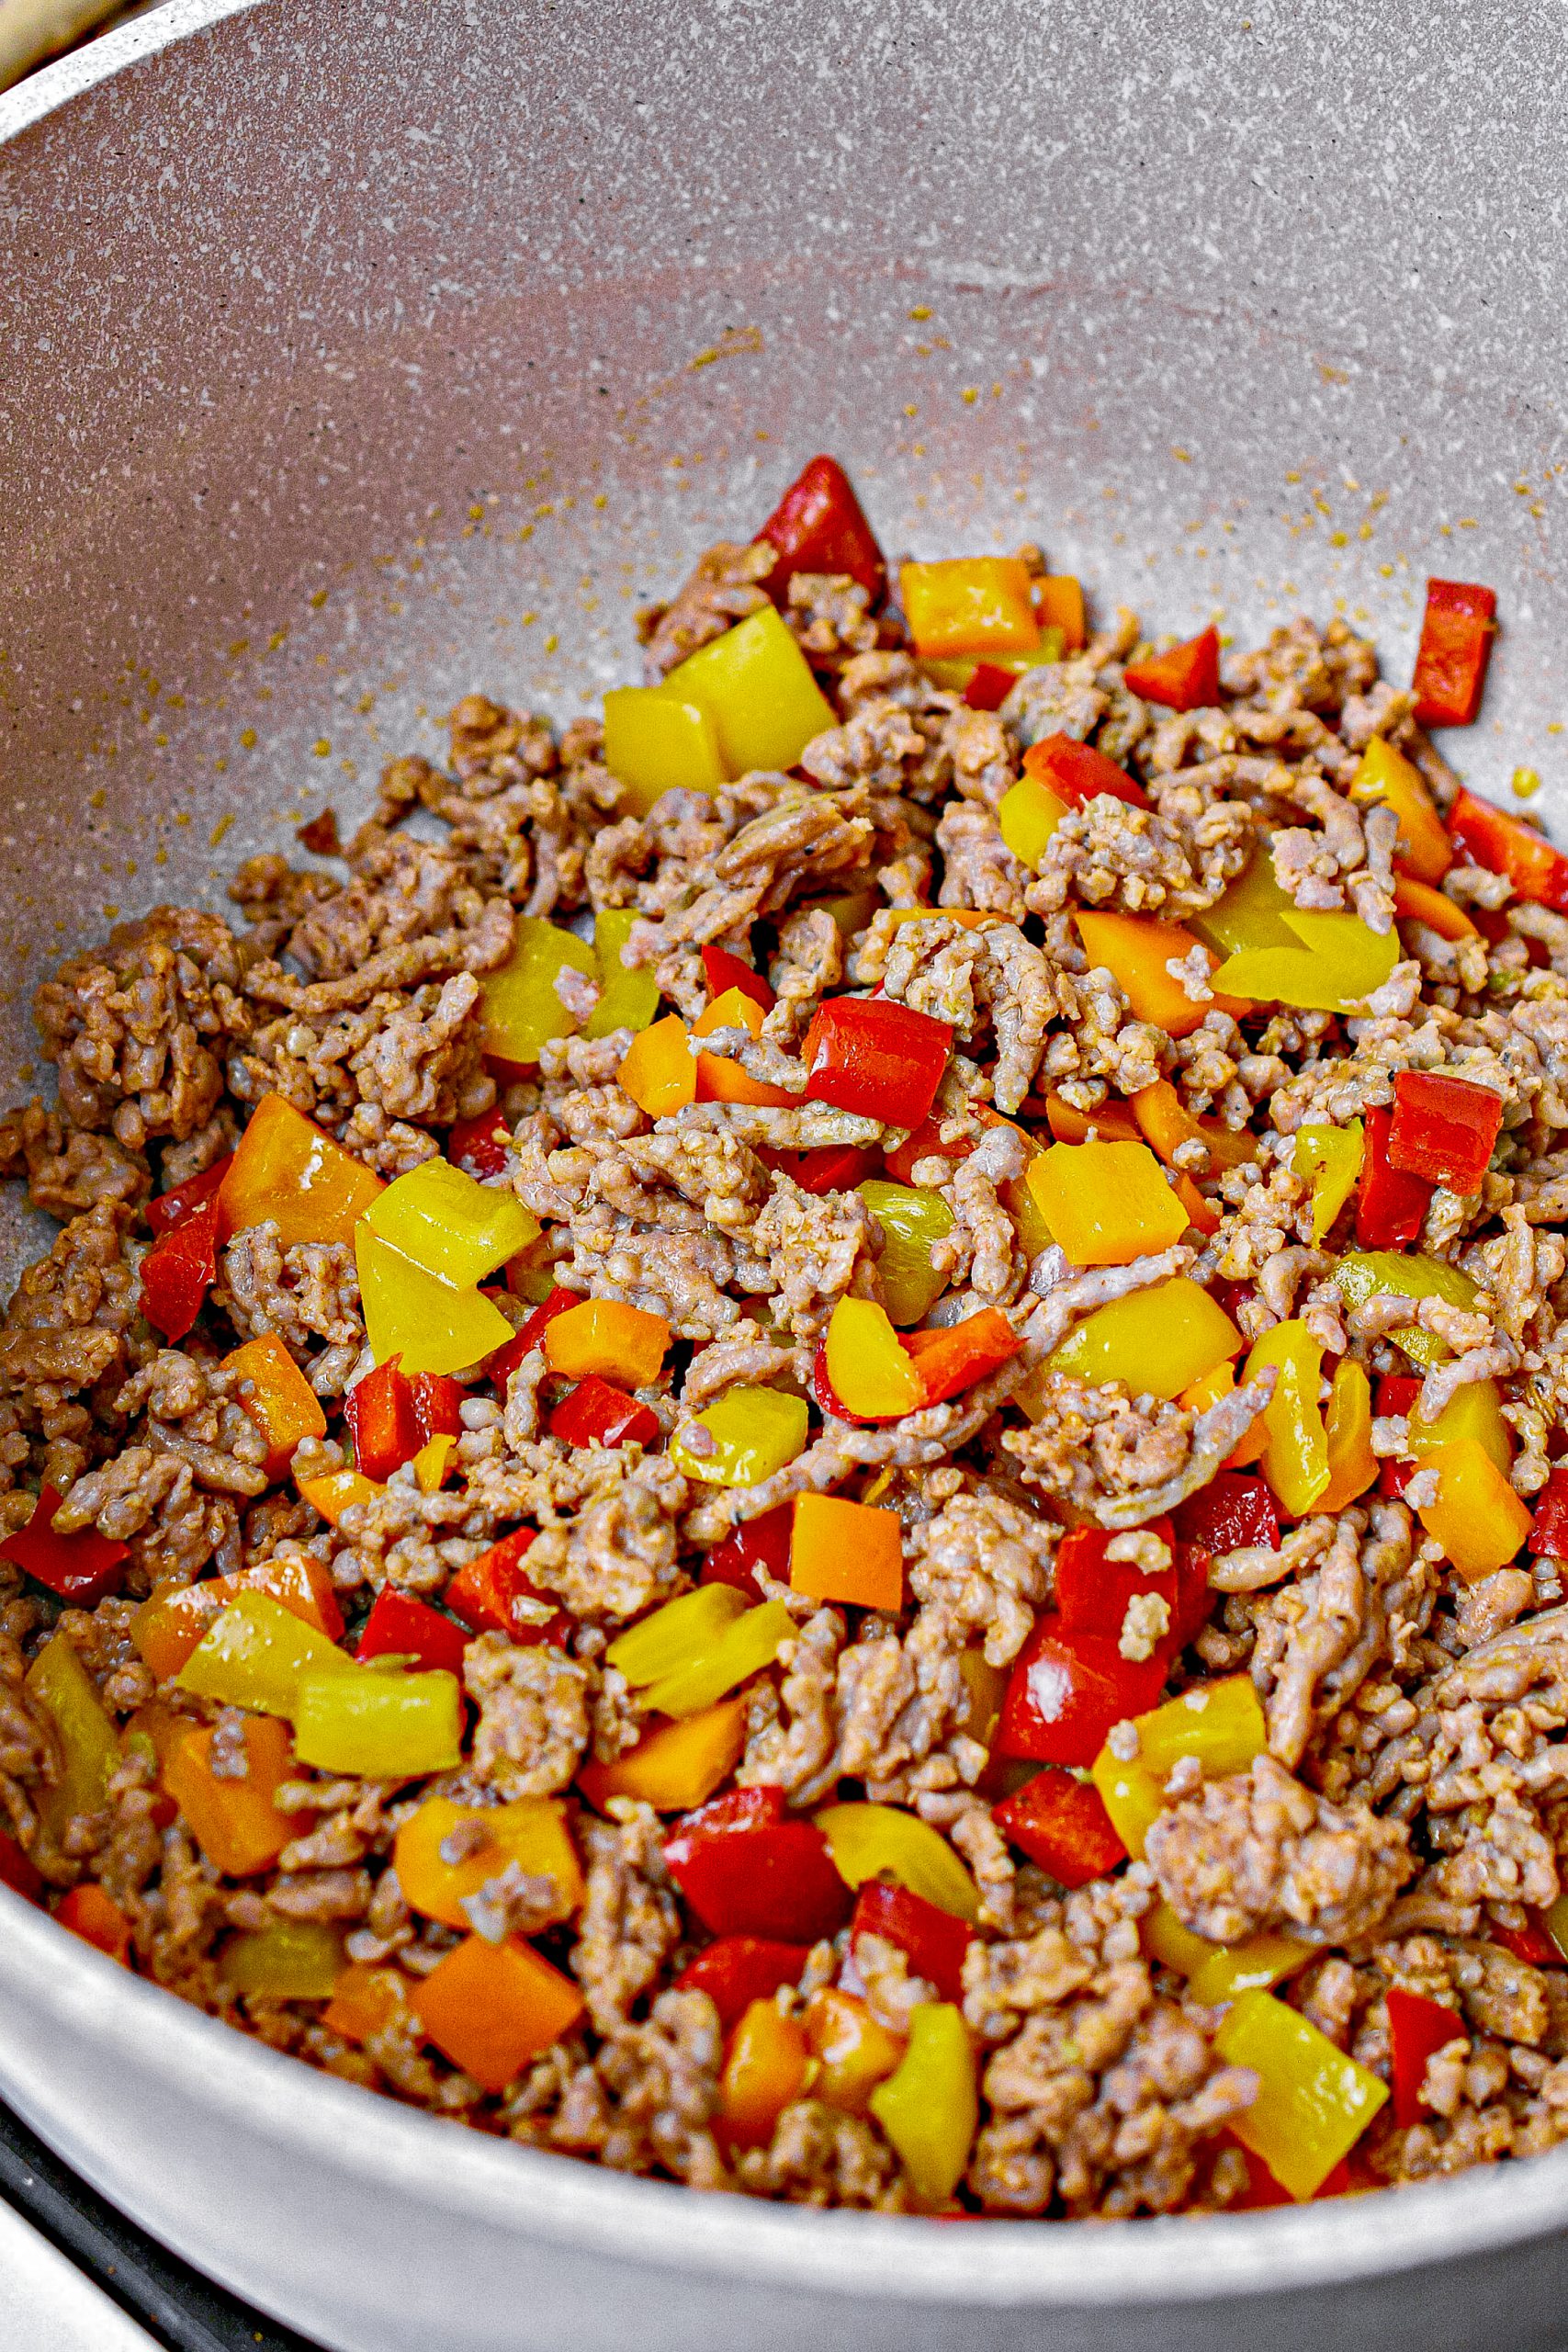 Add the meat and peppers to a large saucepan or skillet with deep sides over medium-high heat. Cook until the meat is completely browned and the peppers have begun to soften.